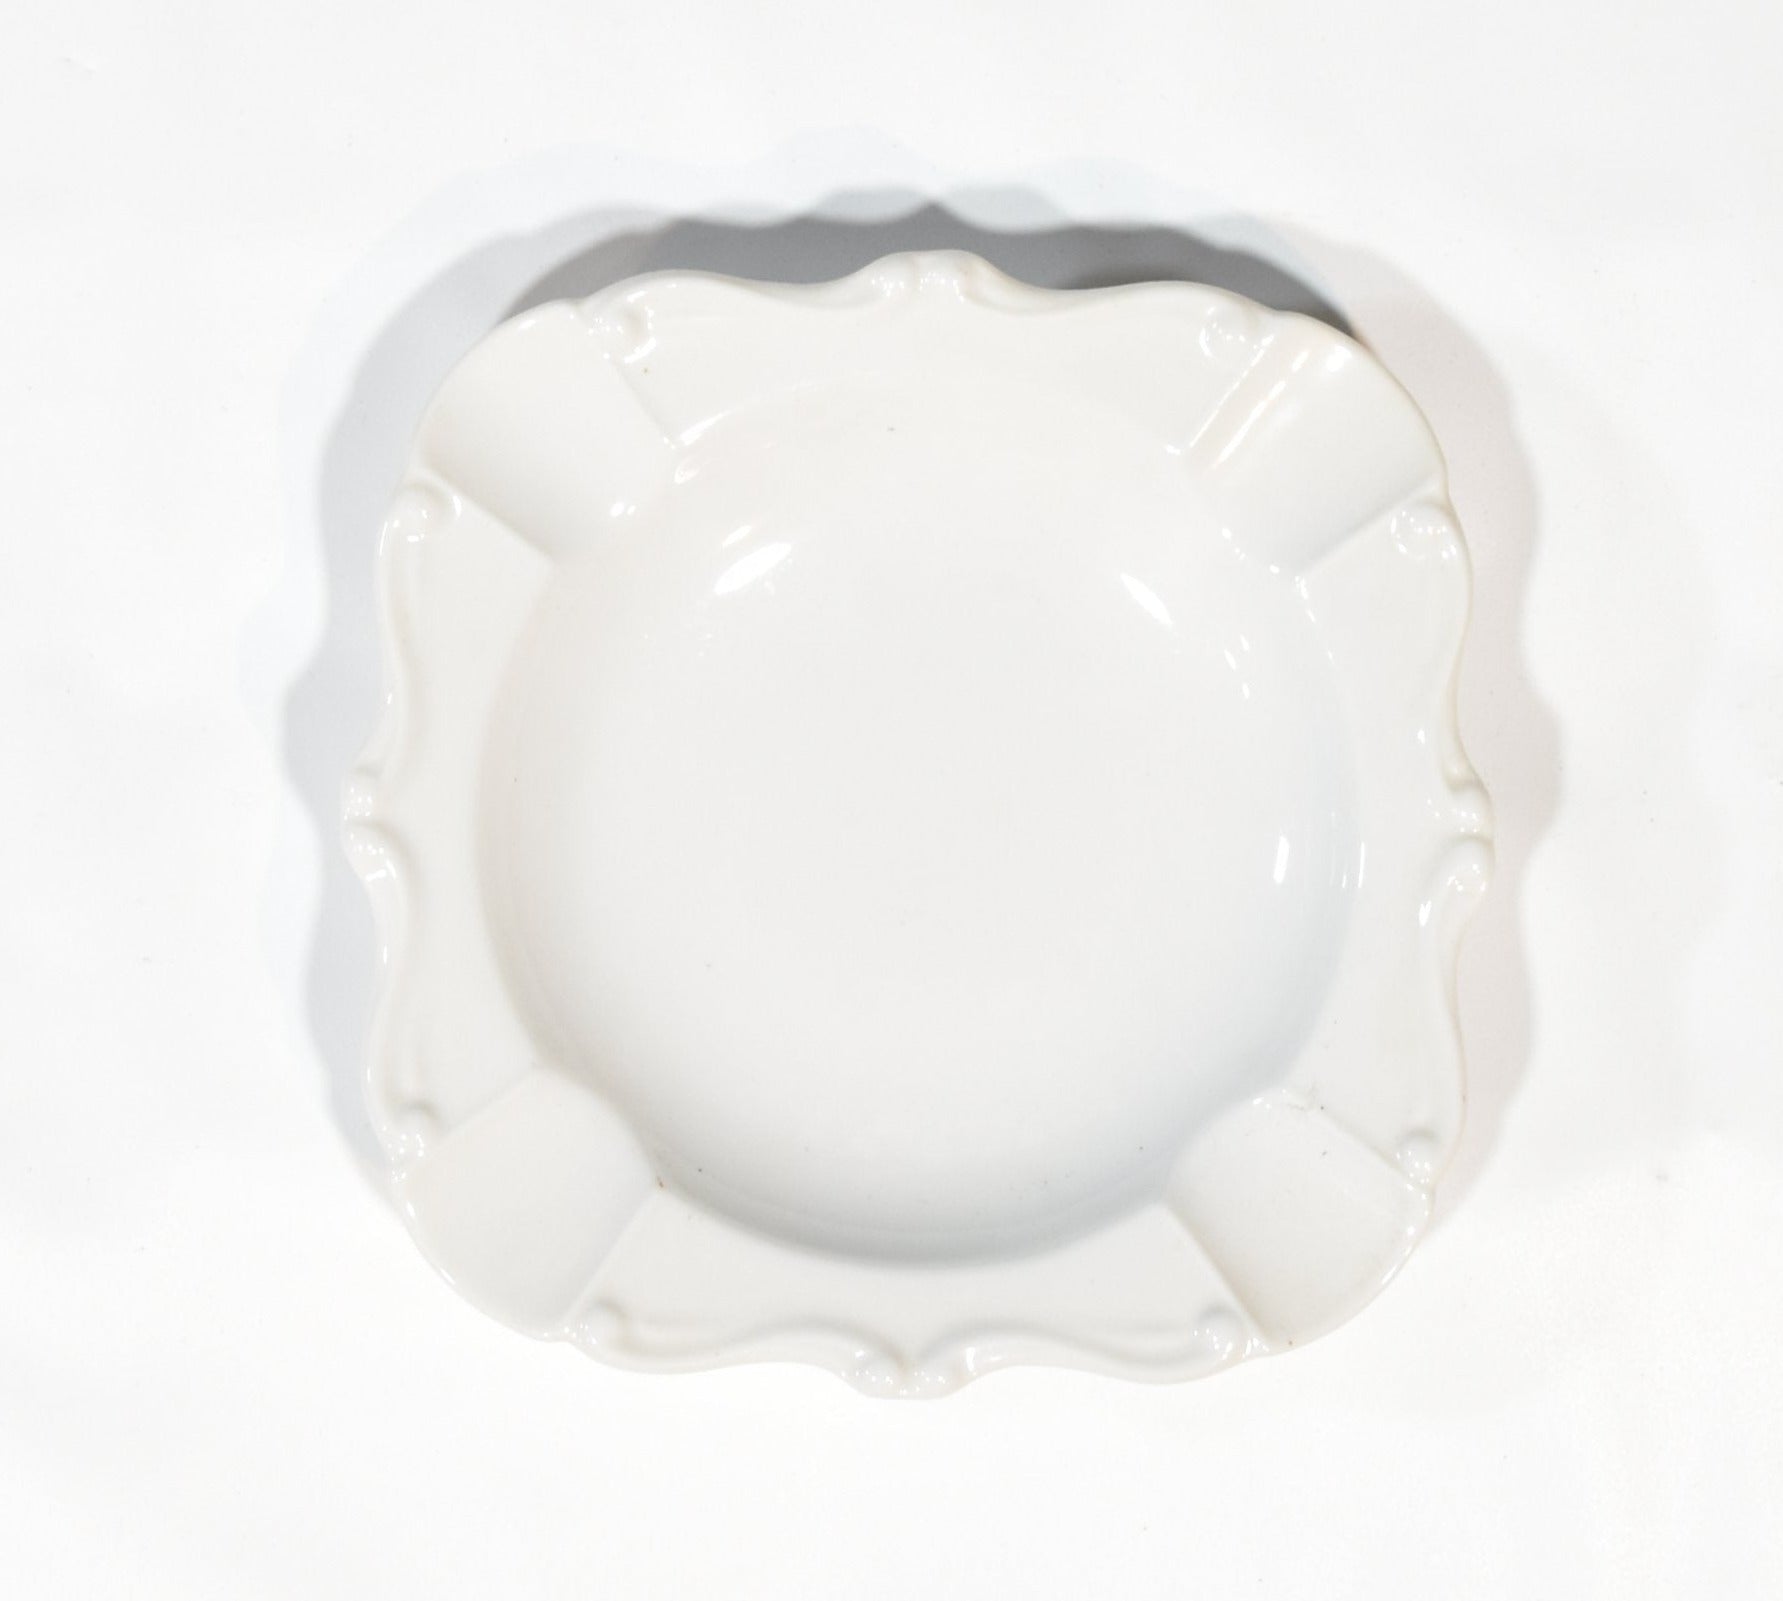 Japanese Ash tray White milk glass Ash tray Authentic